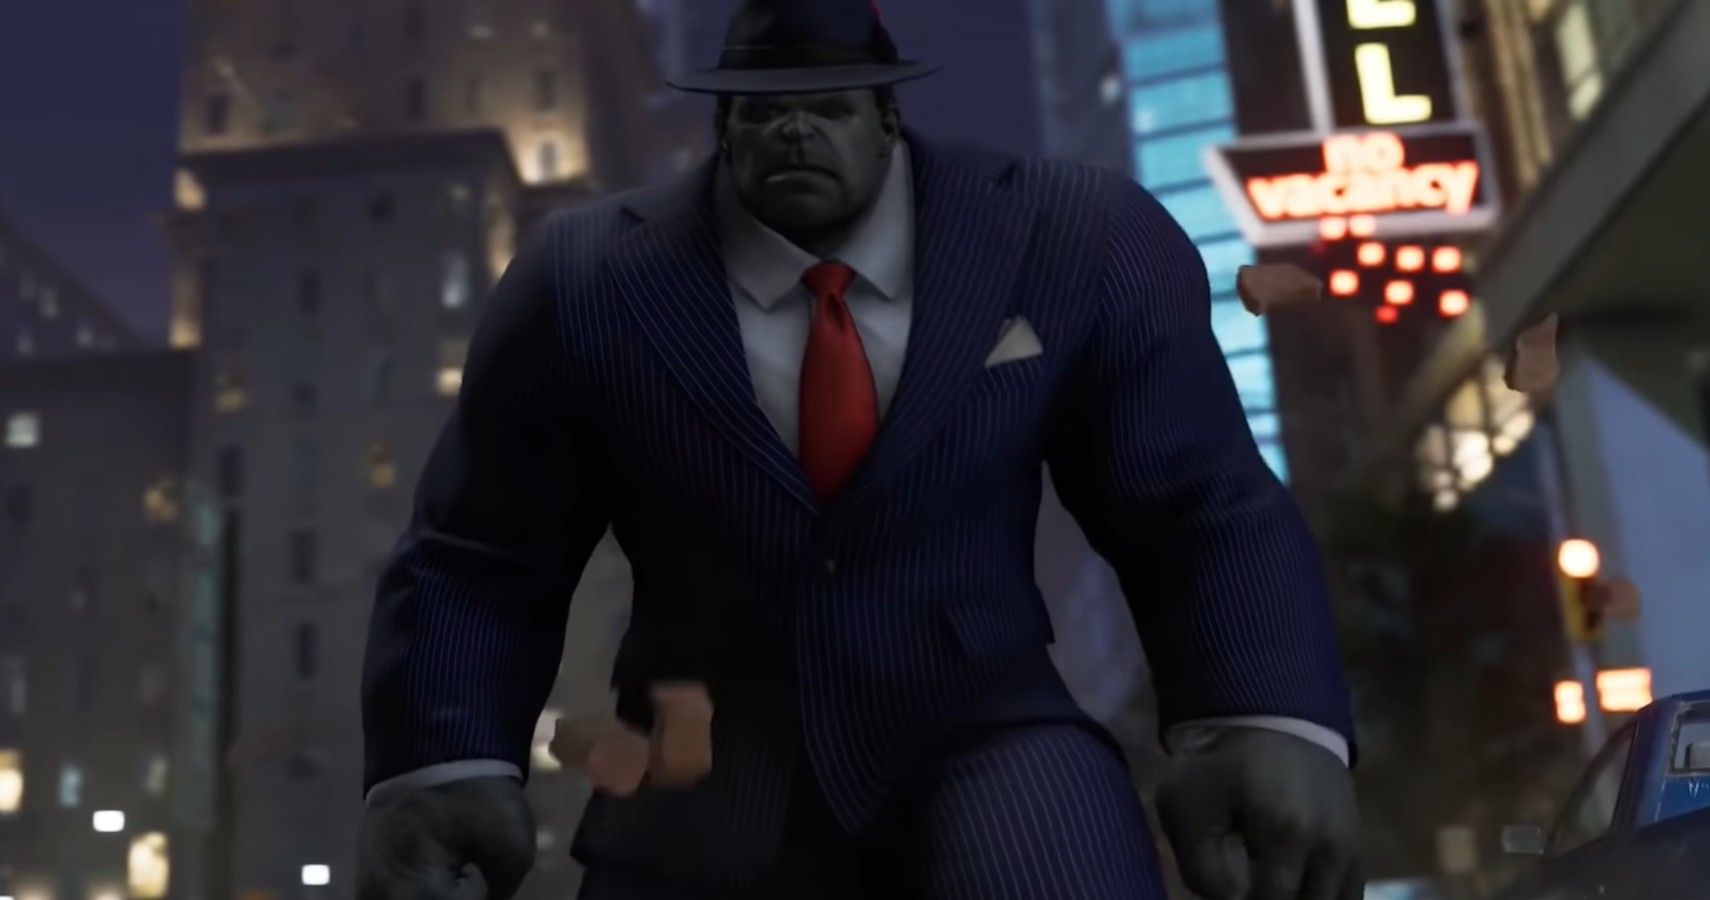 A screenshot of the Hulk from Marvel's Avengers